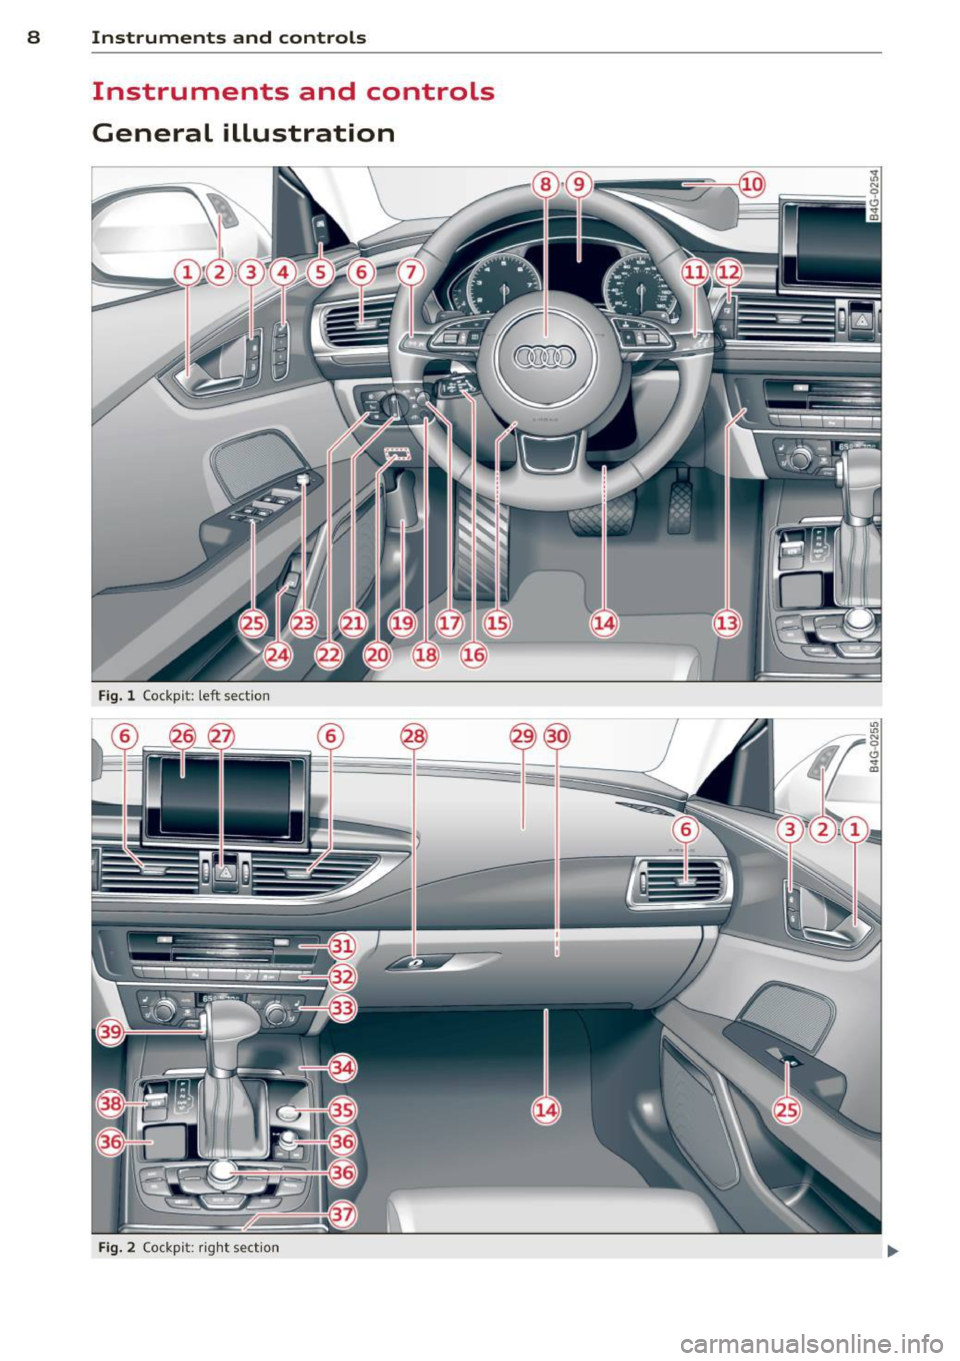 AUDI S7 2012  Owners Manual 8  Instruments and controls 
Instruments  and  controls 
General  illustration 
Fig. l Cockp it:  left  sect io n 
Fig. 2 Co ck pi t: ri ght  sect io n  